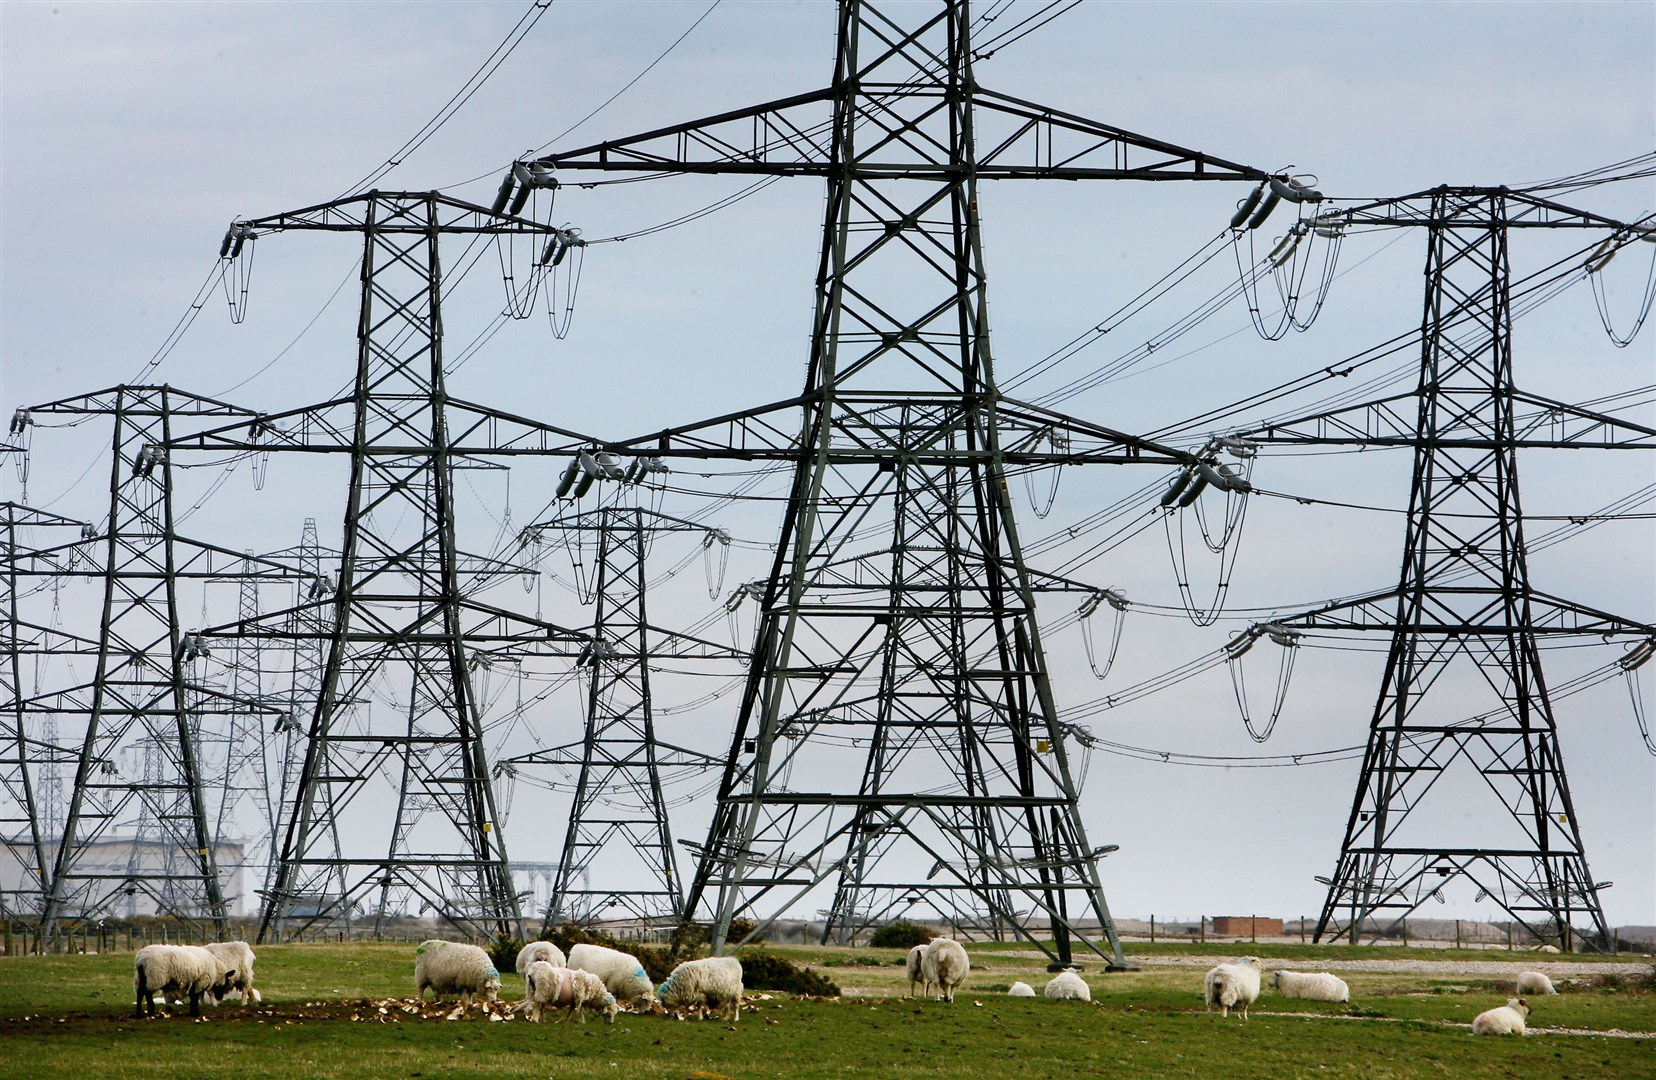 Decarbonisation in power is being held back by delays in connecting renewables projects to the national grid as some operators must wait more than a decade to connect (Gareth Fuller/PA)